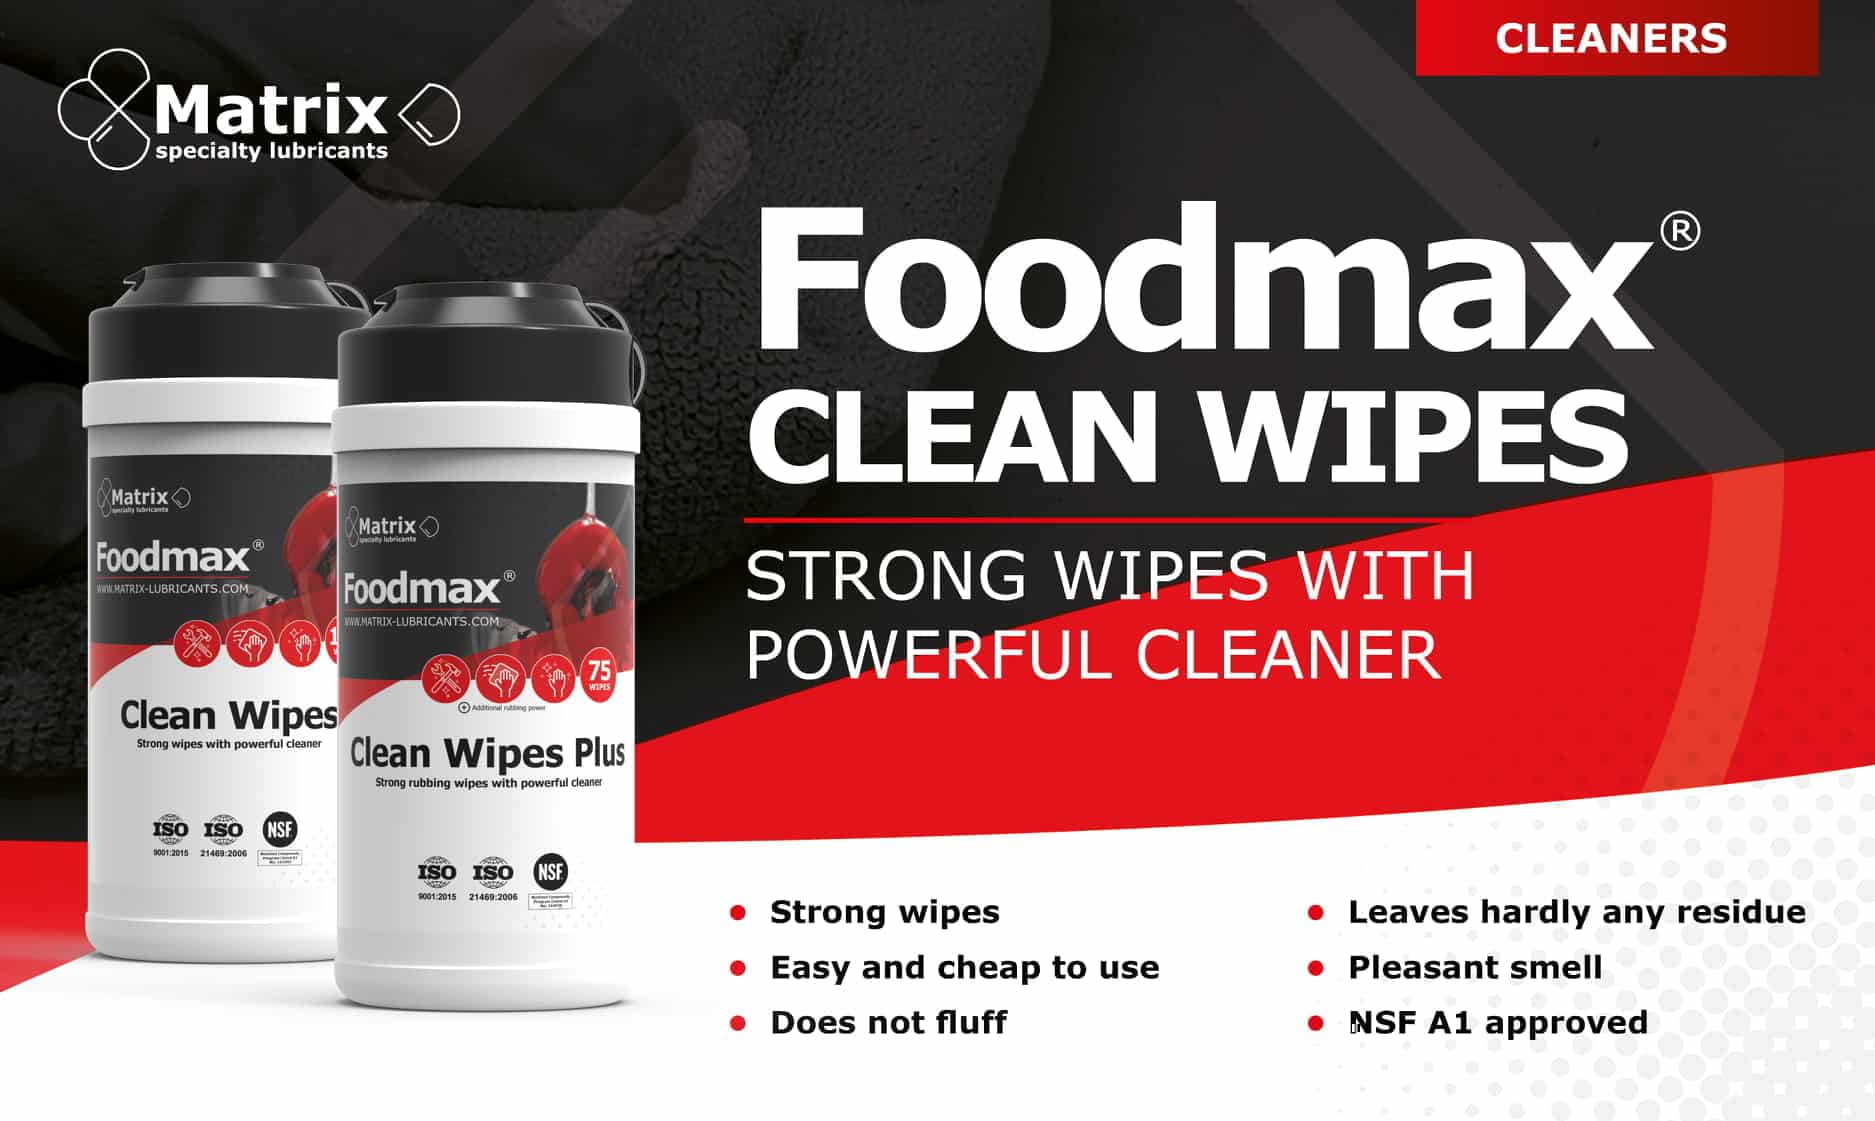 Matrix specialty lubricants' Foodmax Clean Wipes and Clean Wipes Plus containers